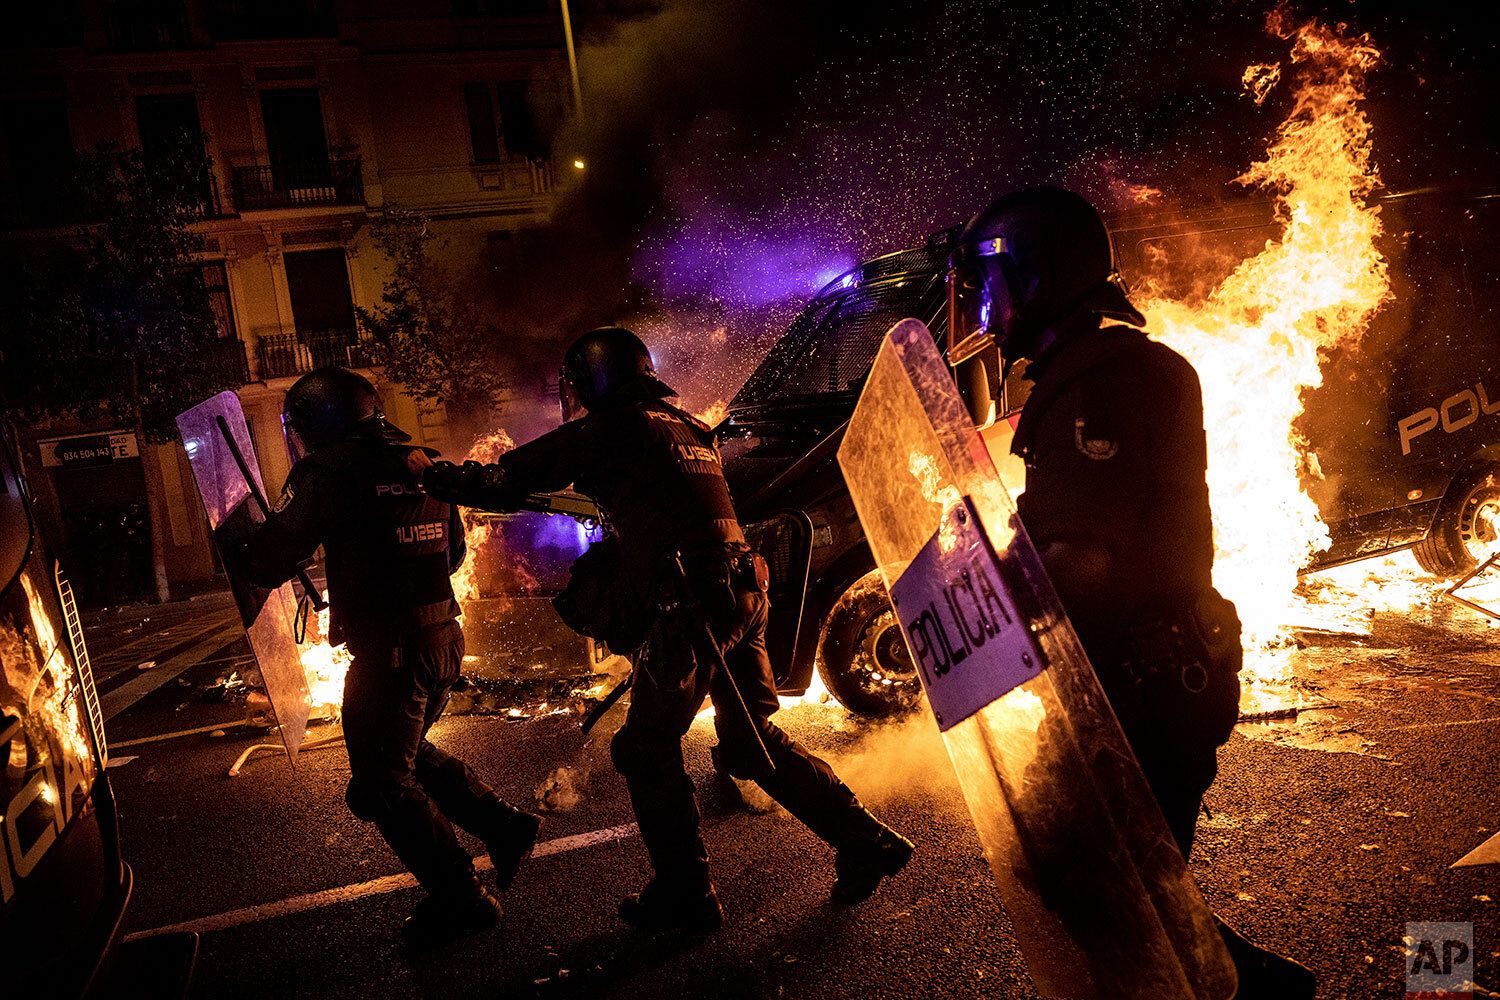  Policemen run as a police van drives over a burning barricade during clashes between protestors and police in Barcelona, Spain, Wednesday, Oct. 16, 2019. Spain's government said Wednesday it would do whatever it takes to stamp out violence in Catalo